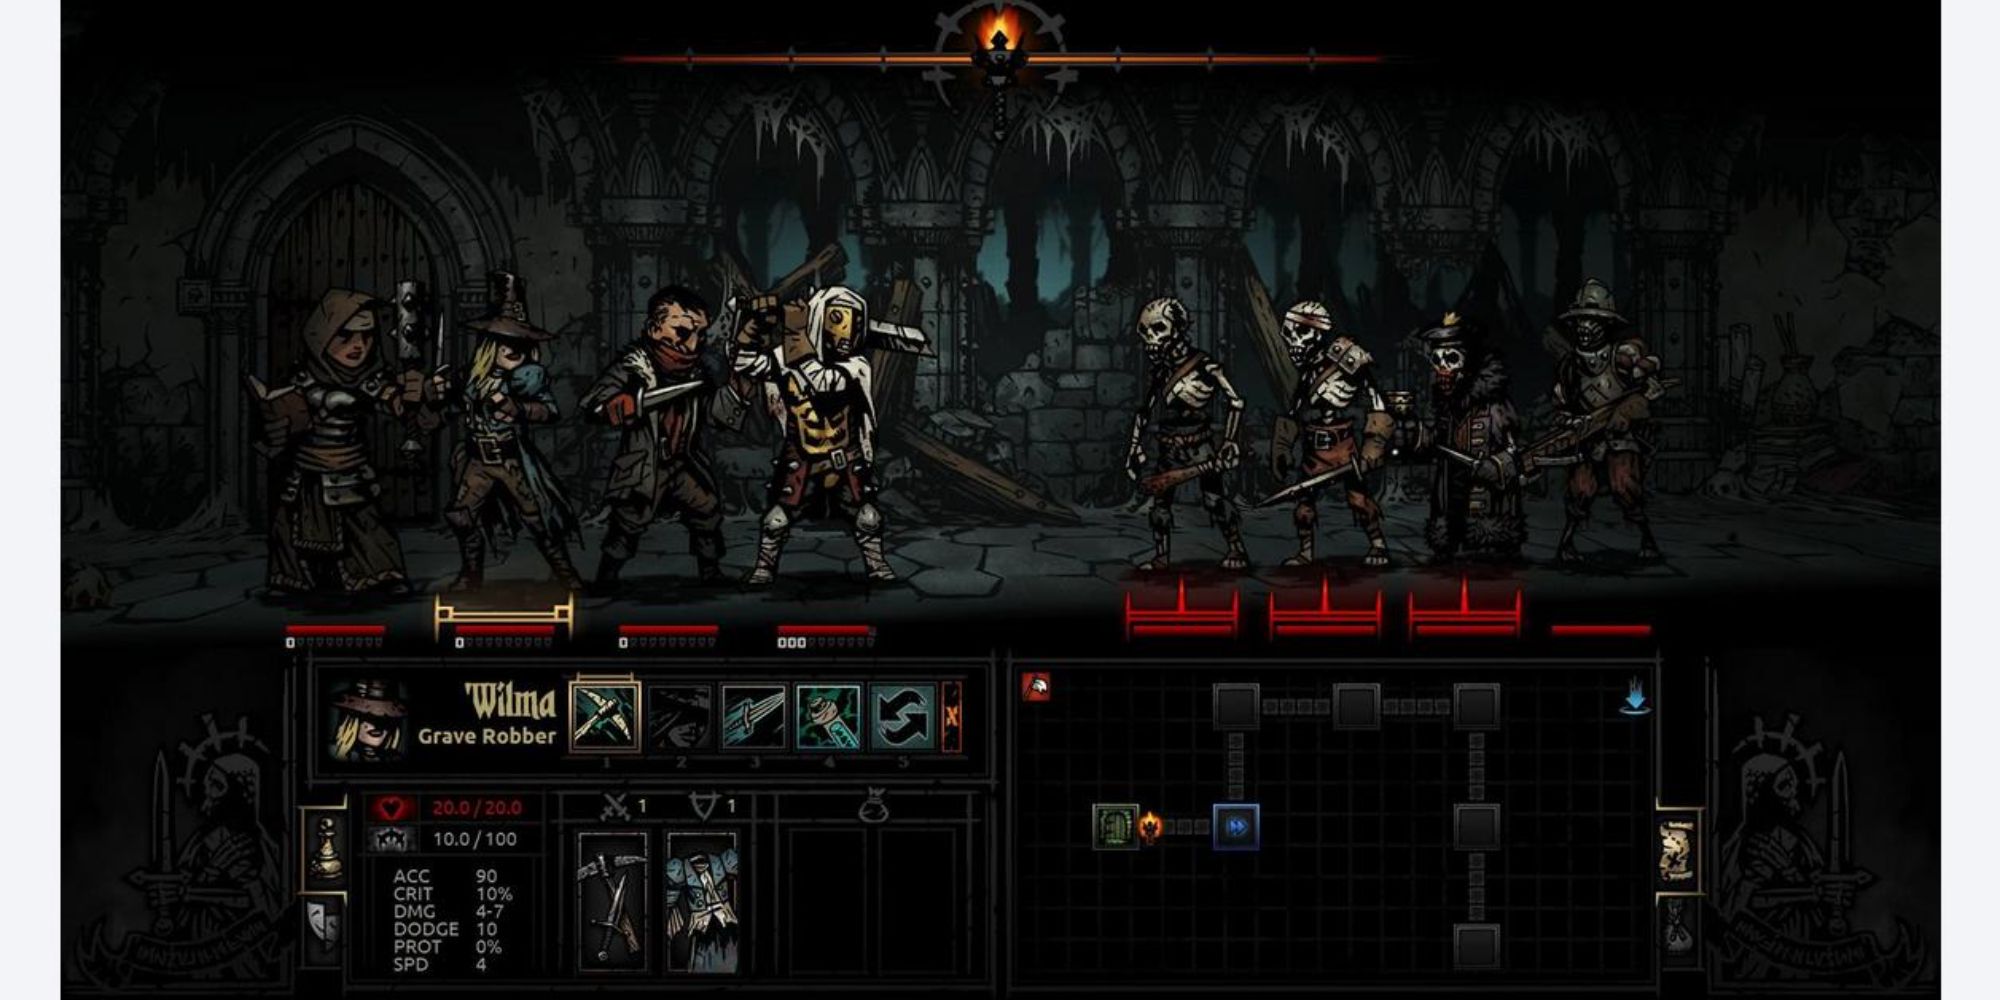 A player's party facing a party of zombies in Darkest Dungeon